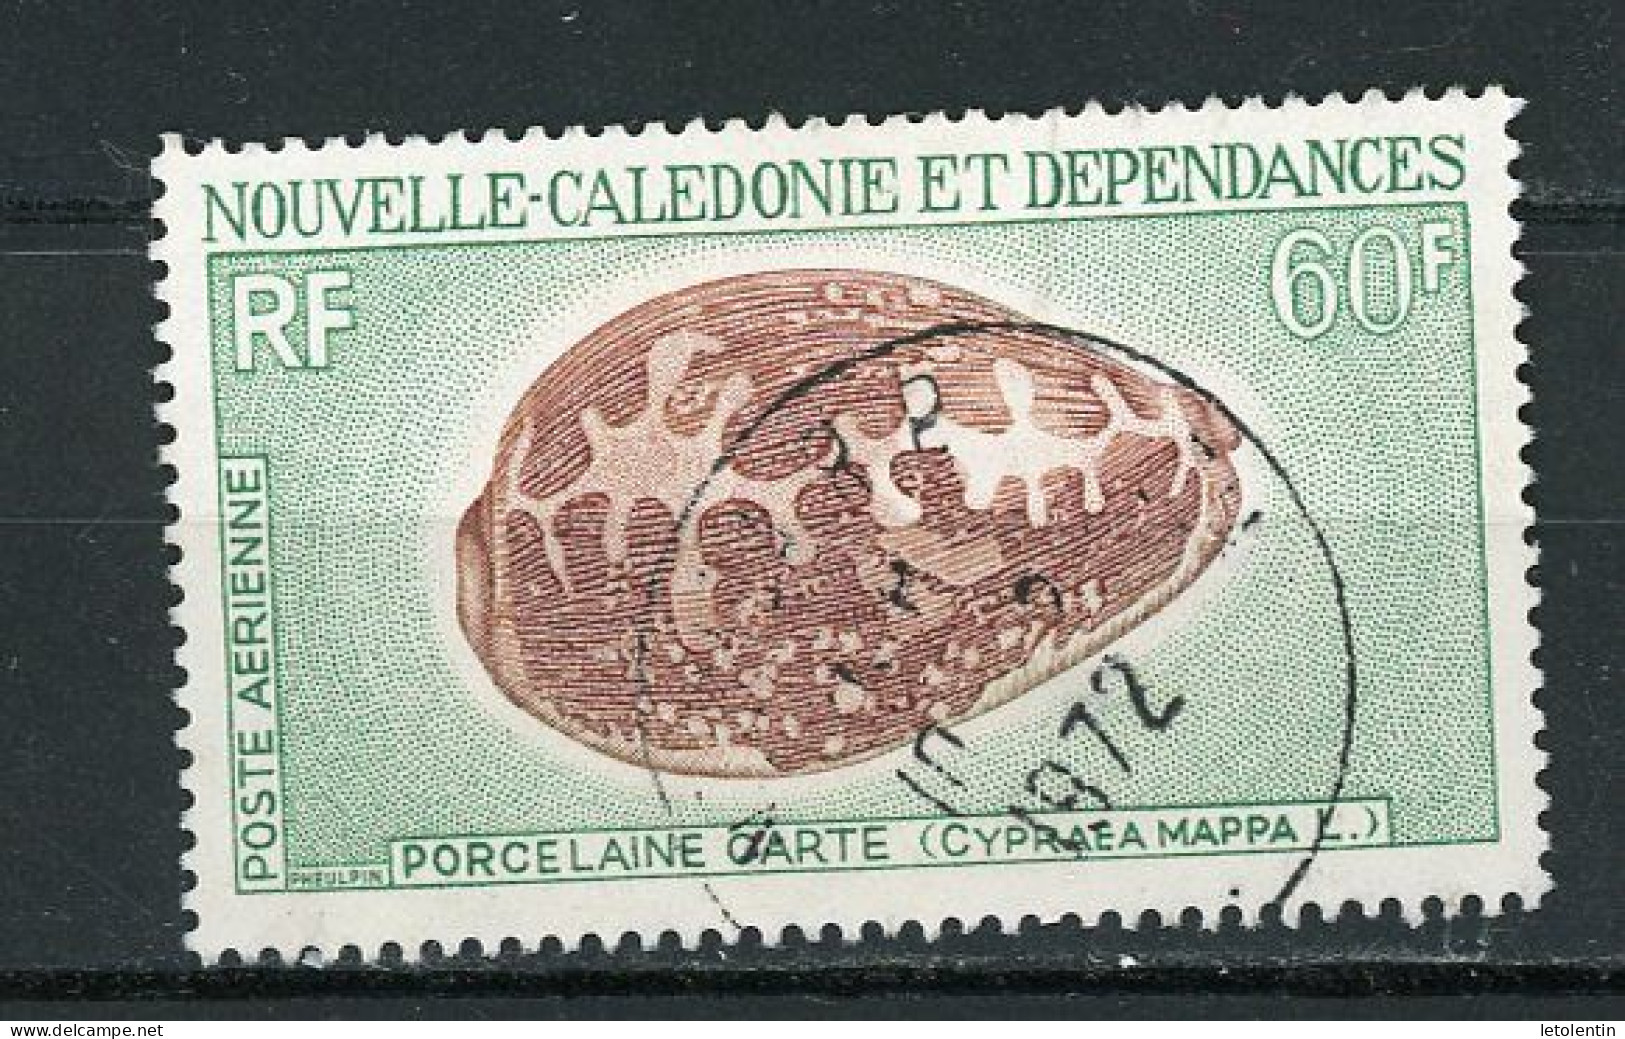 NOUVELLE-CALEDONIE RF - COQUILLAGE  - PA - N°Yt 116 Obli. - Used Stamps